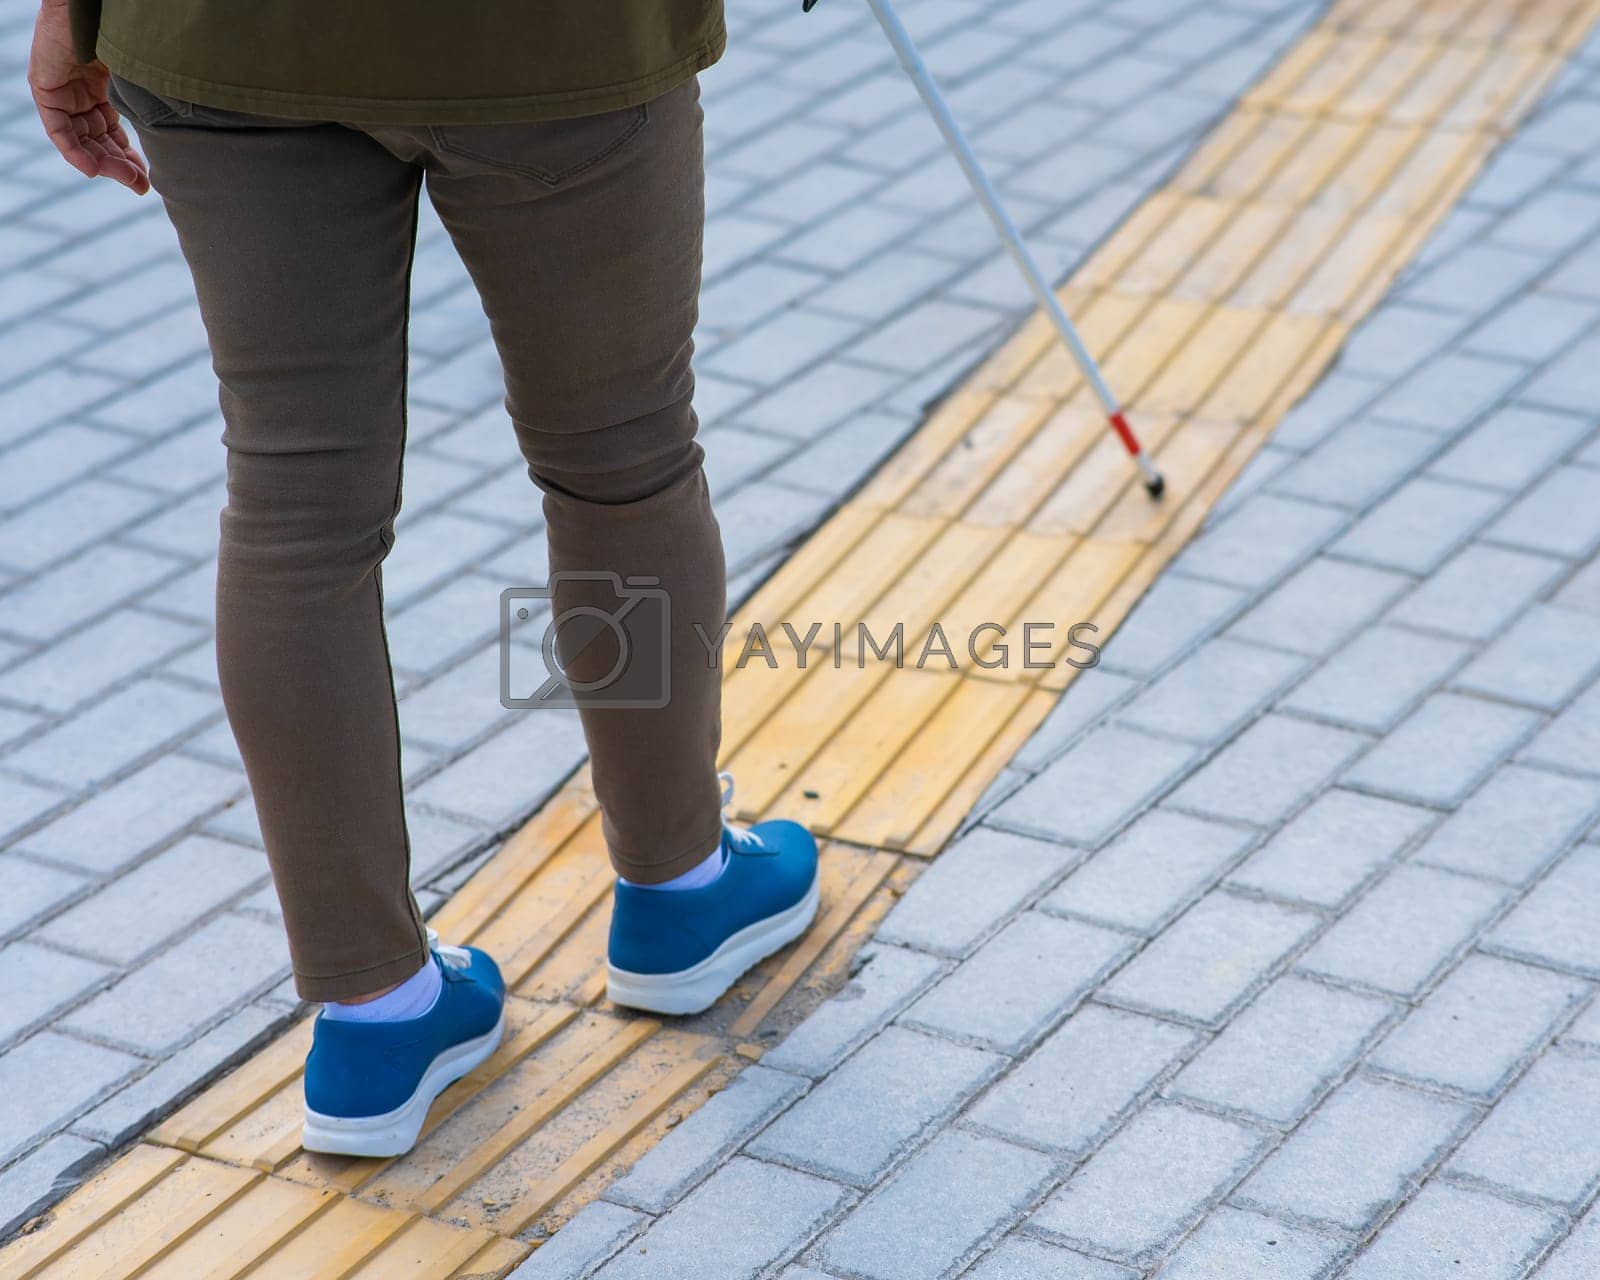 Royalty free image of Close-up of the legs of an elderly blind woman with a cane at a tactile tile. by mrwed54